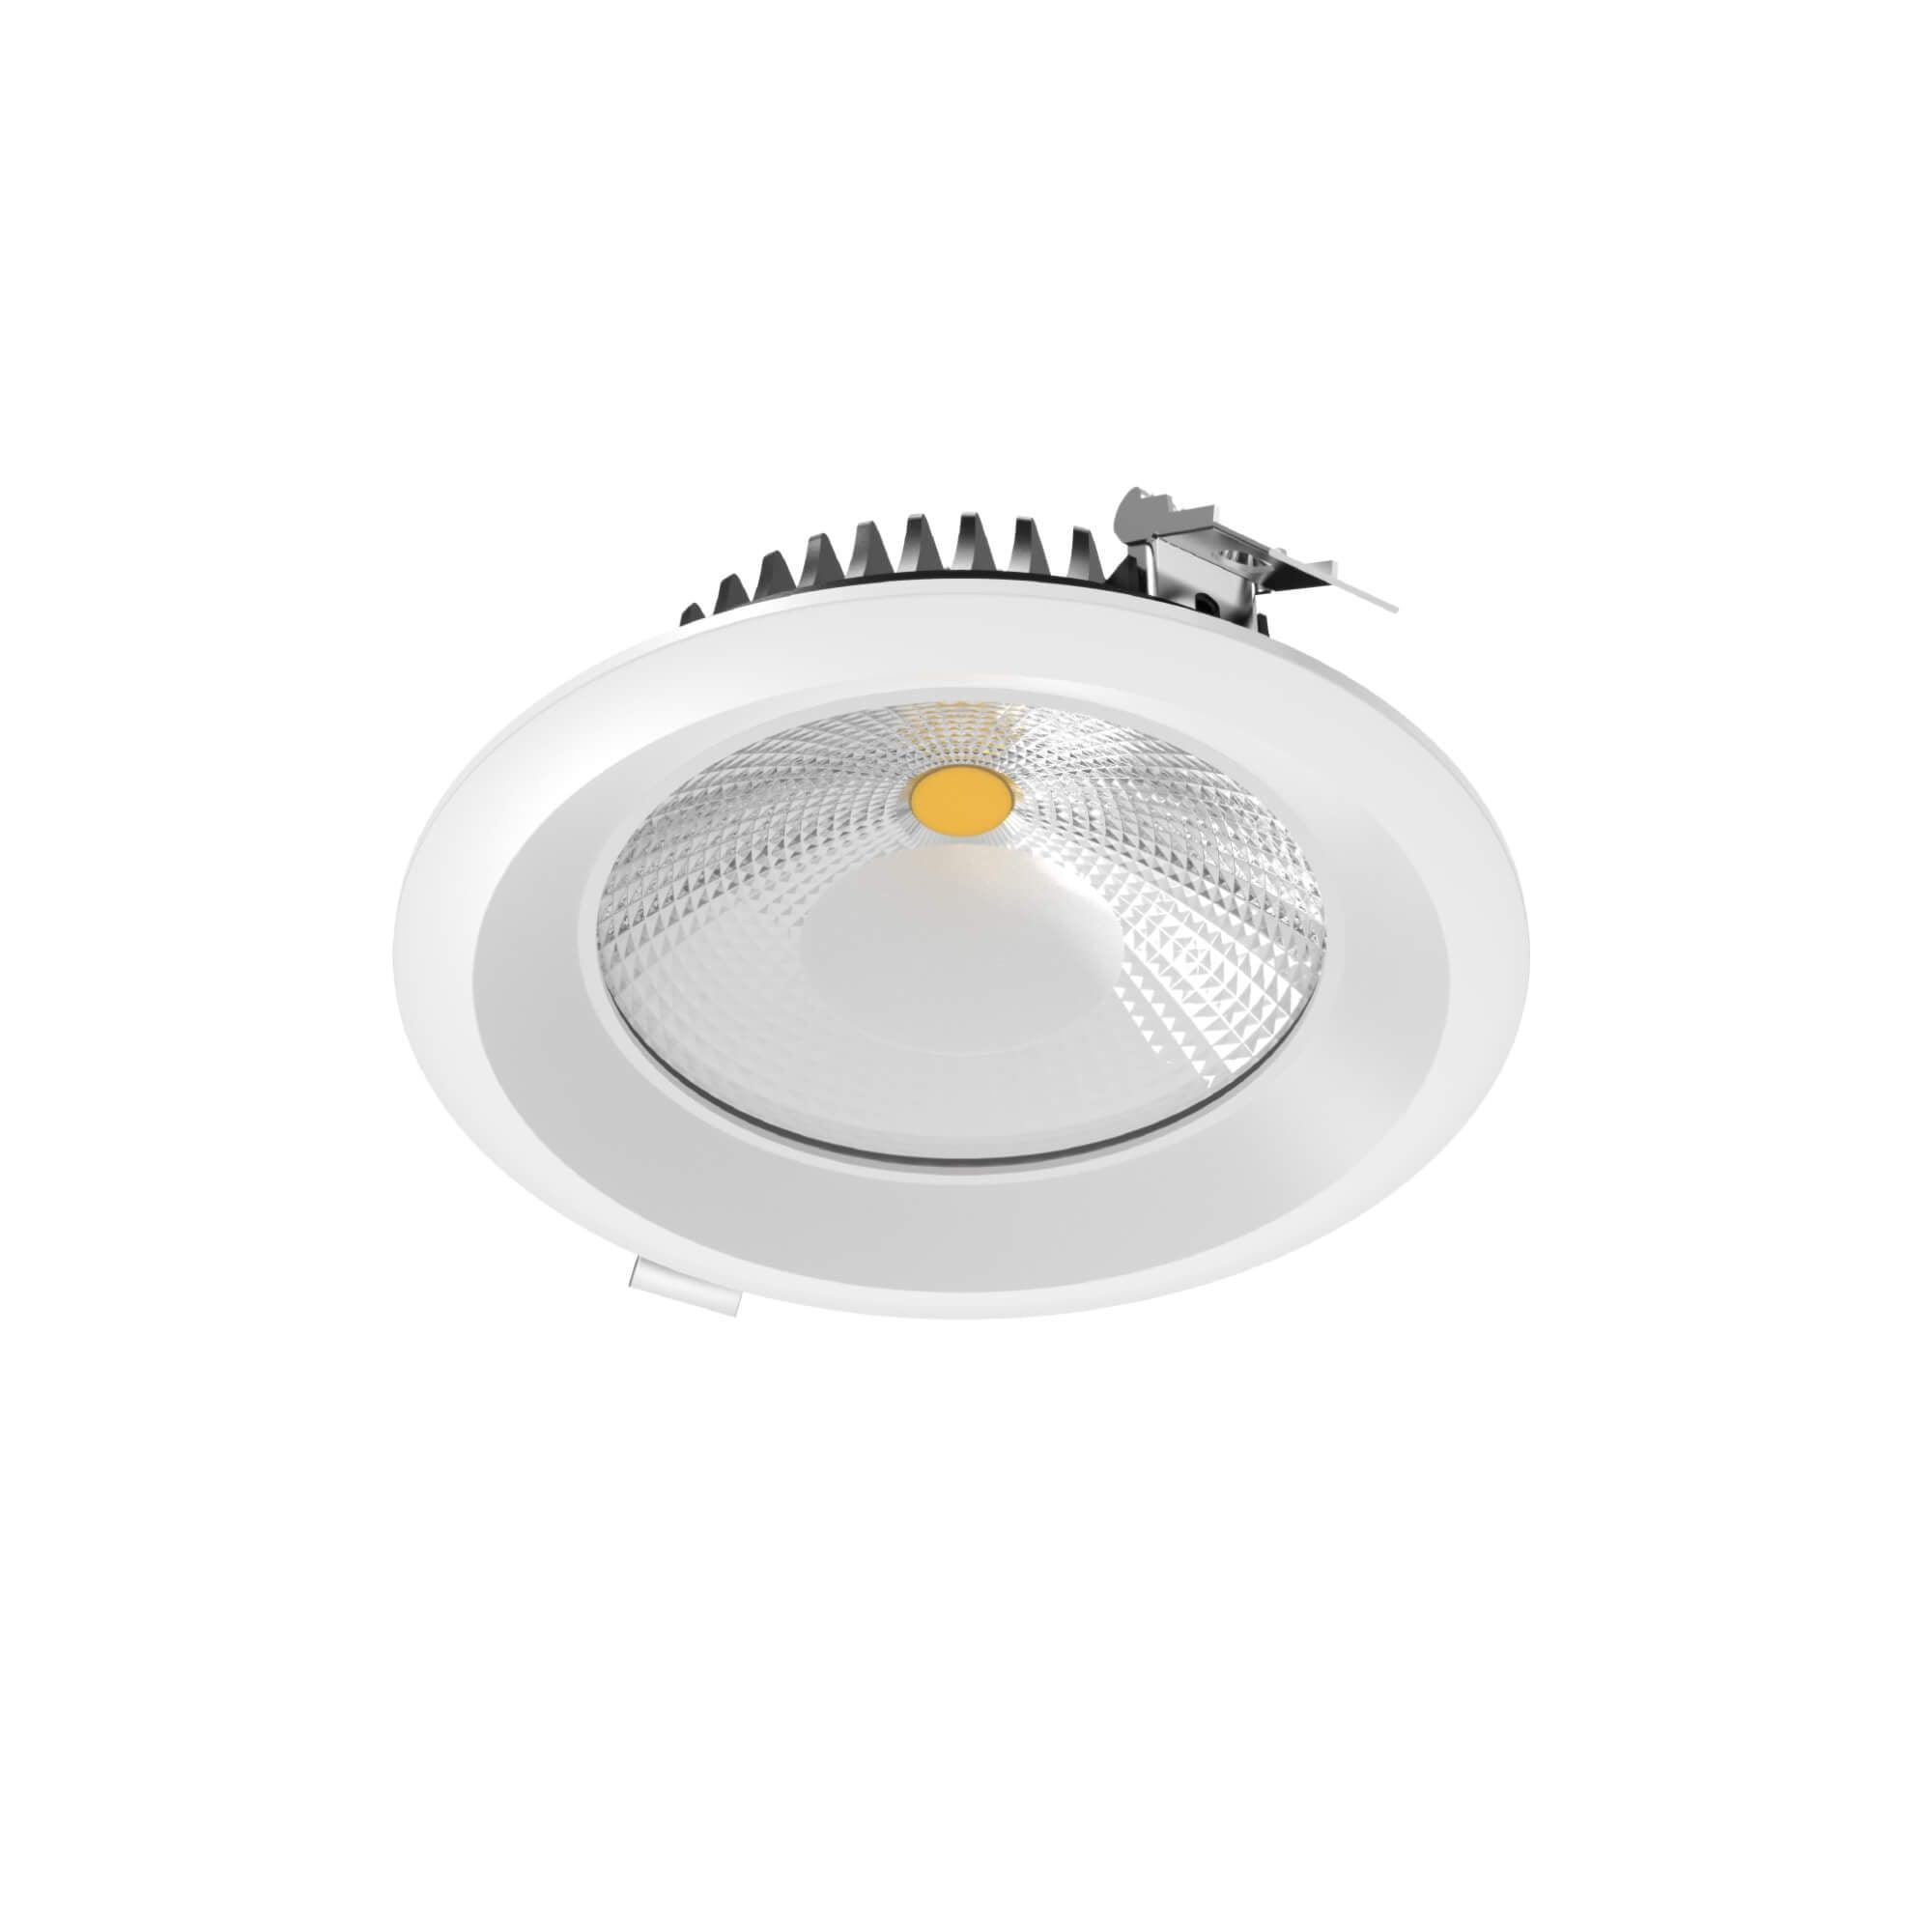 Dals Lighting - HPD 6 Inch High Powered LED Commercial Down Light - HPD6-CC-V-WH | Montreal Lighting & Hardware